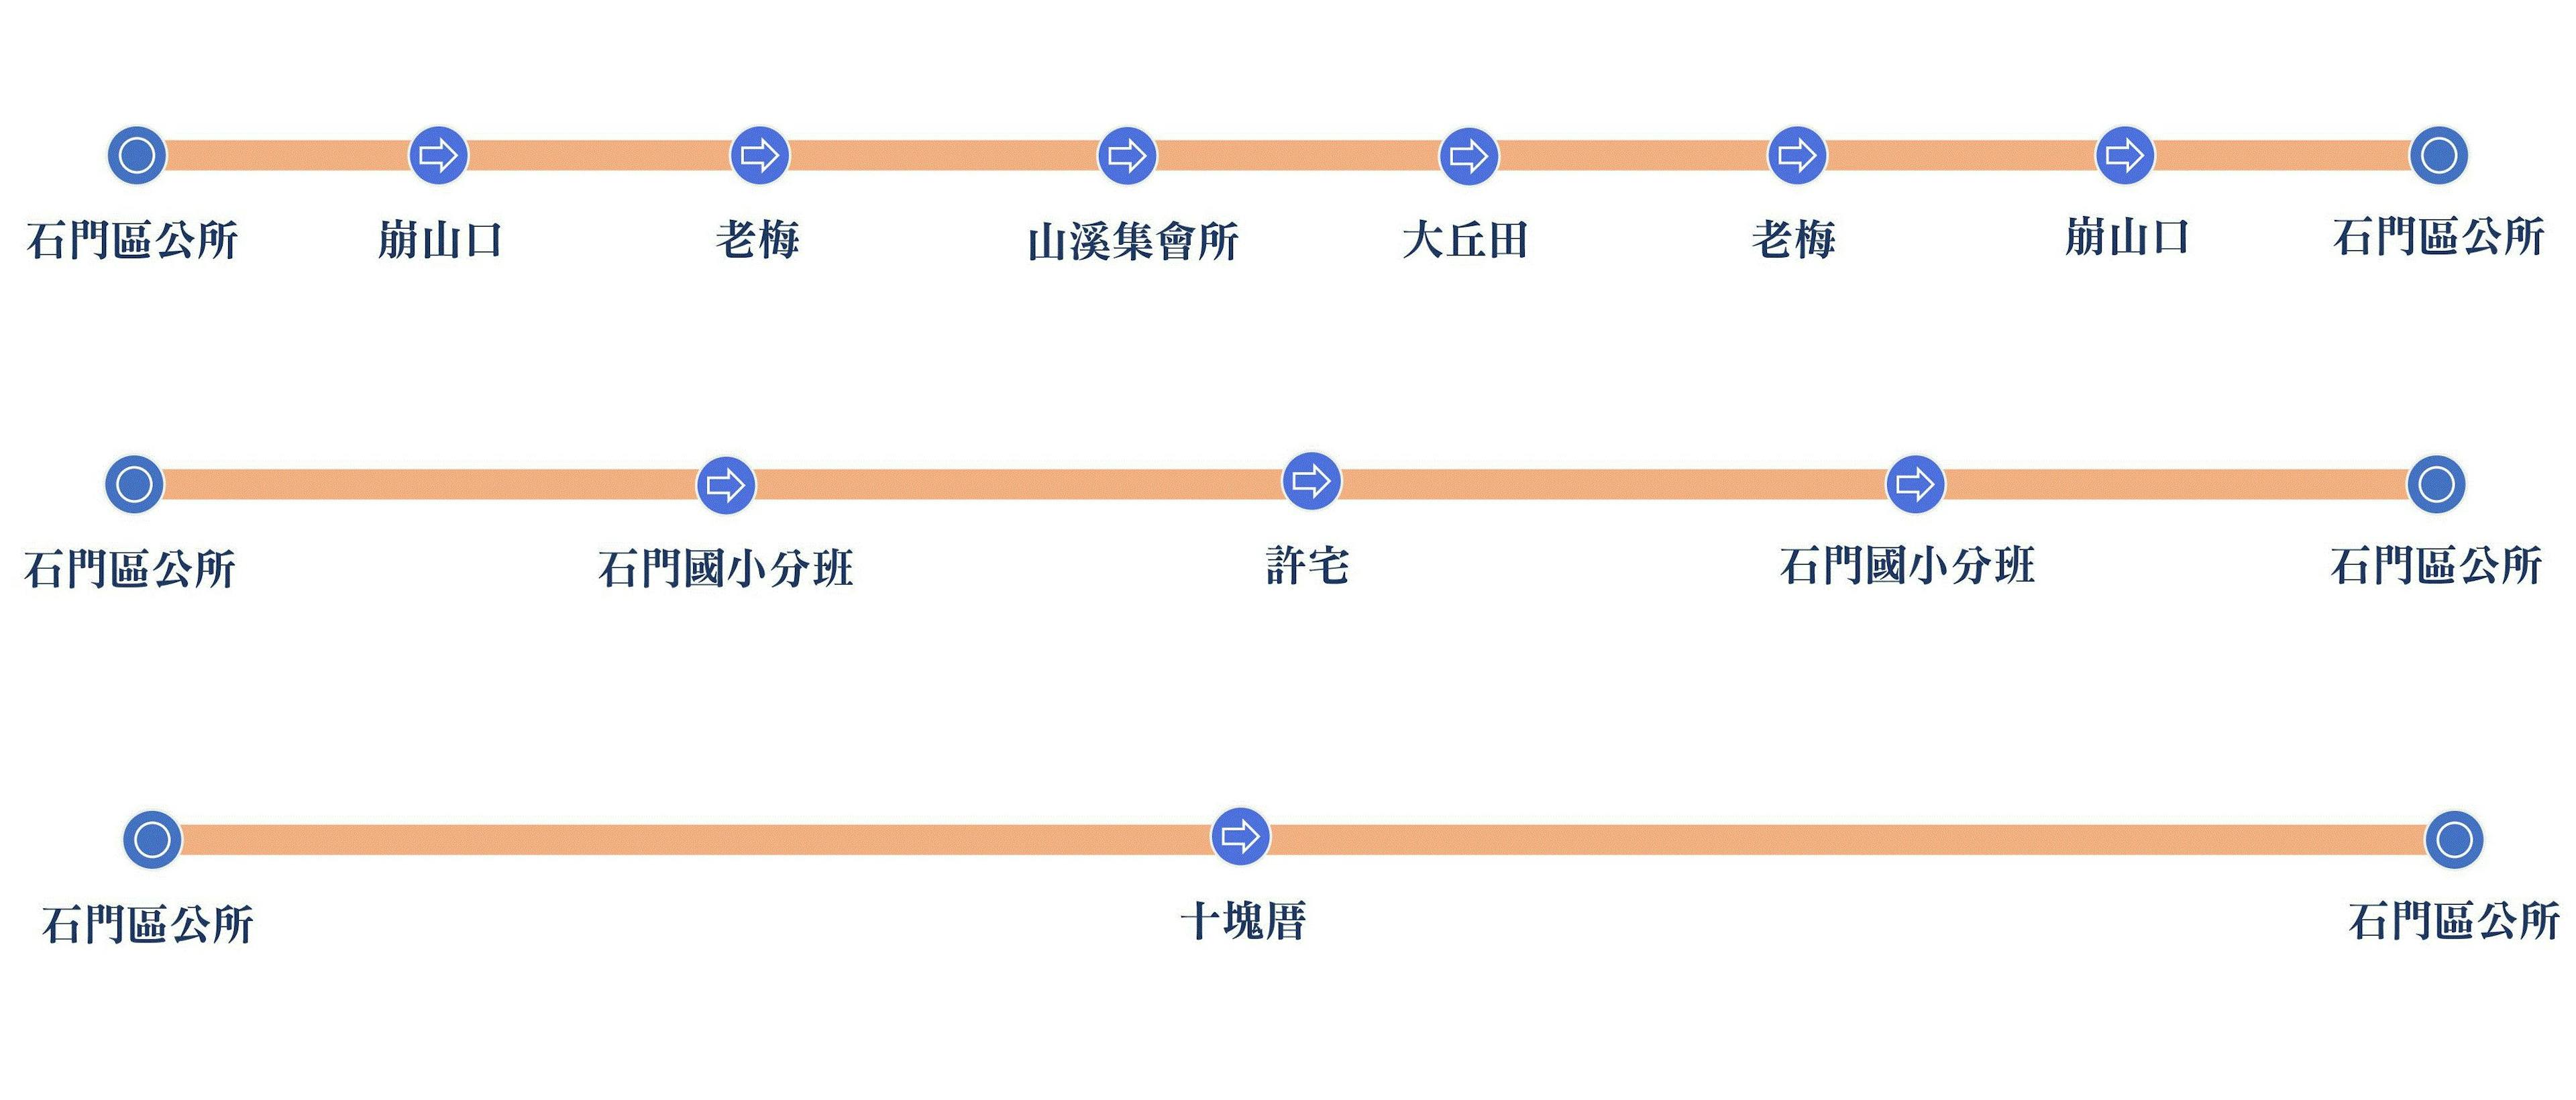 F151-1000Route Map-新北市 Bus